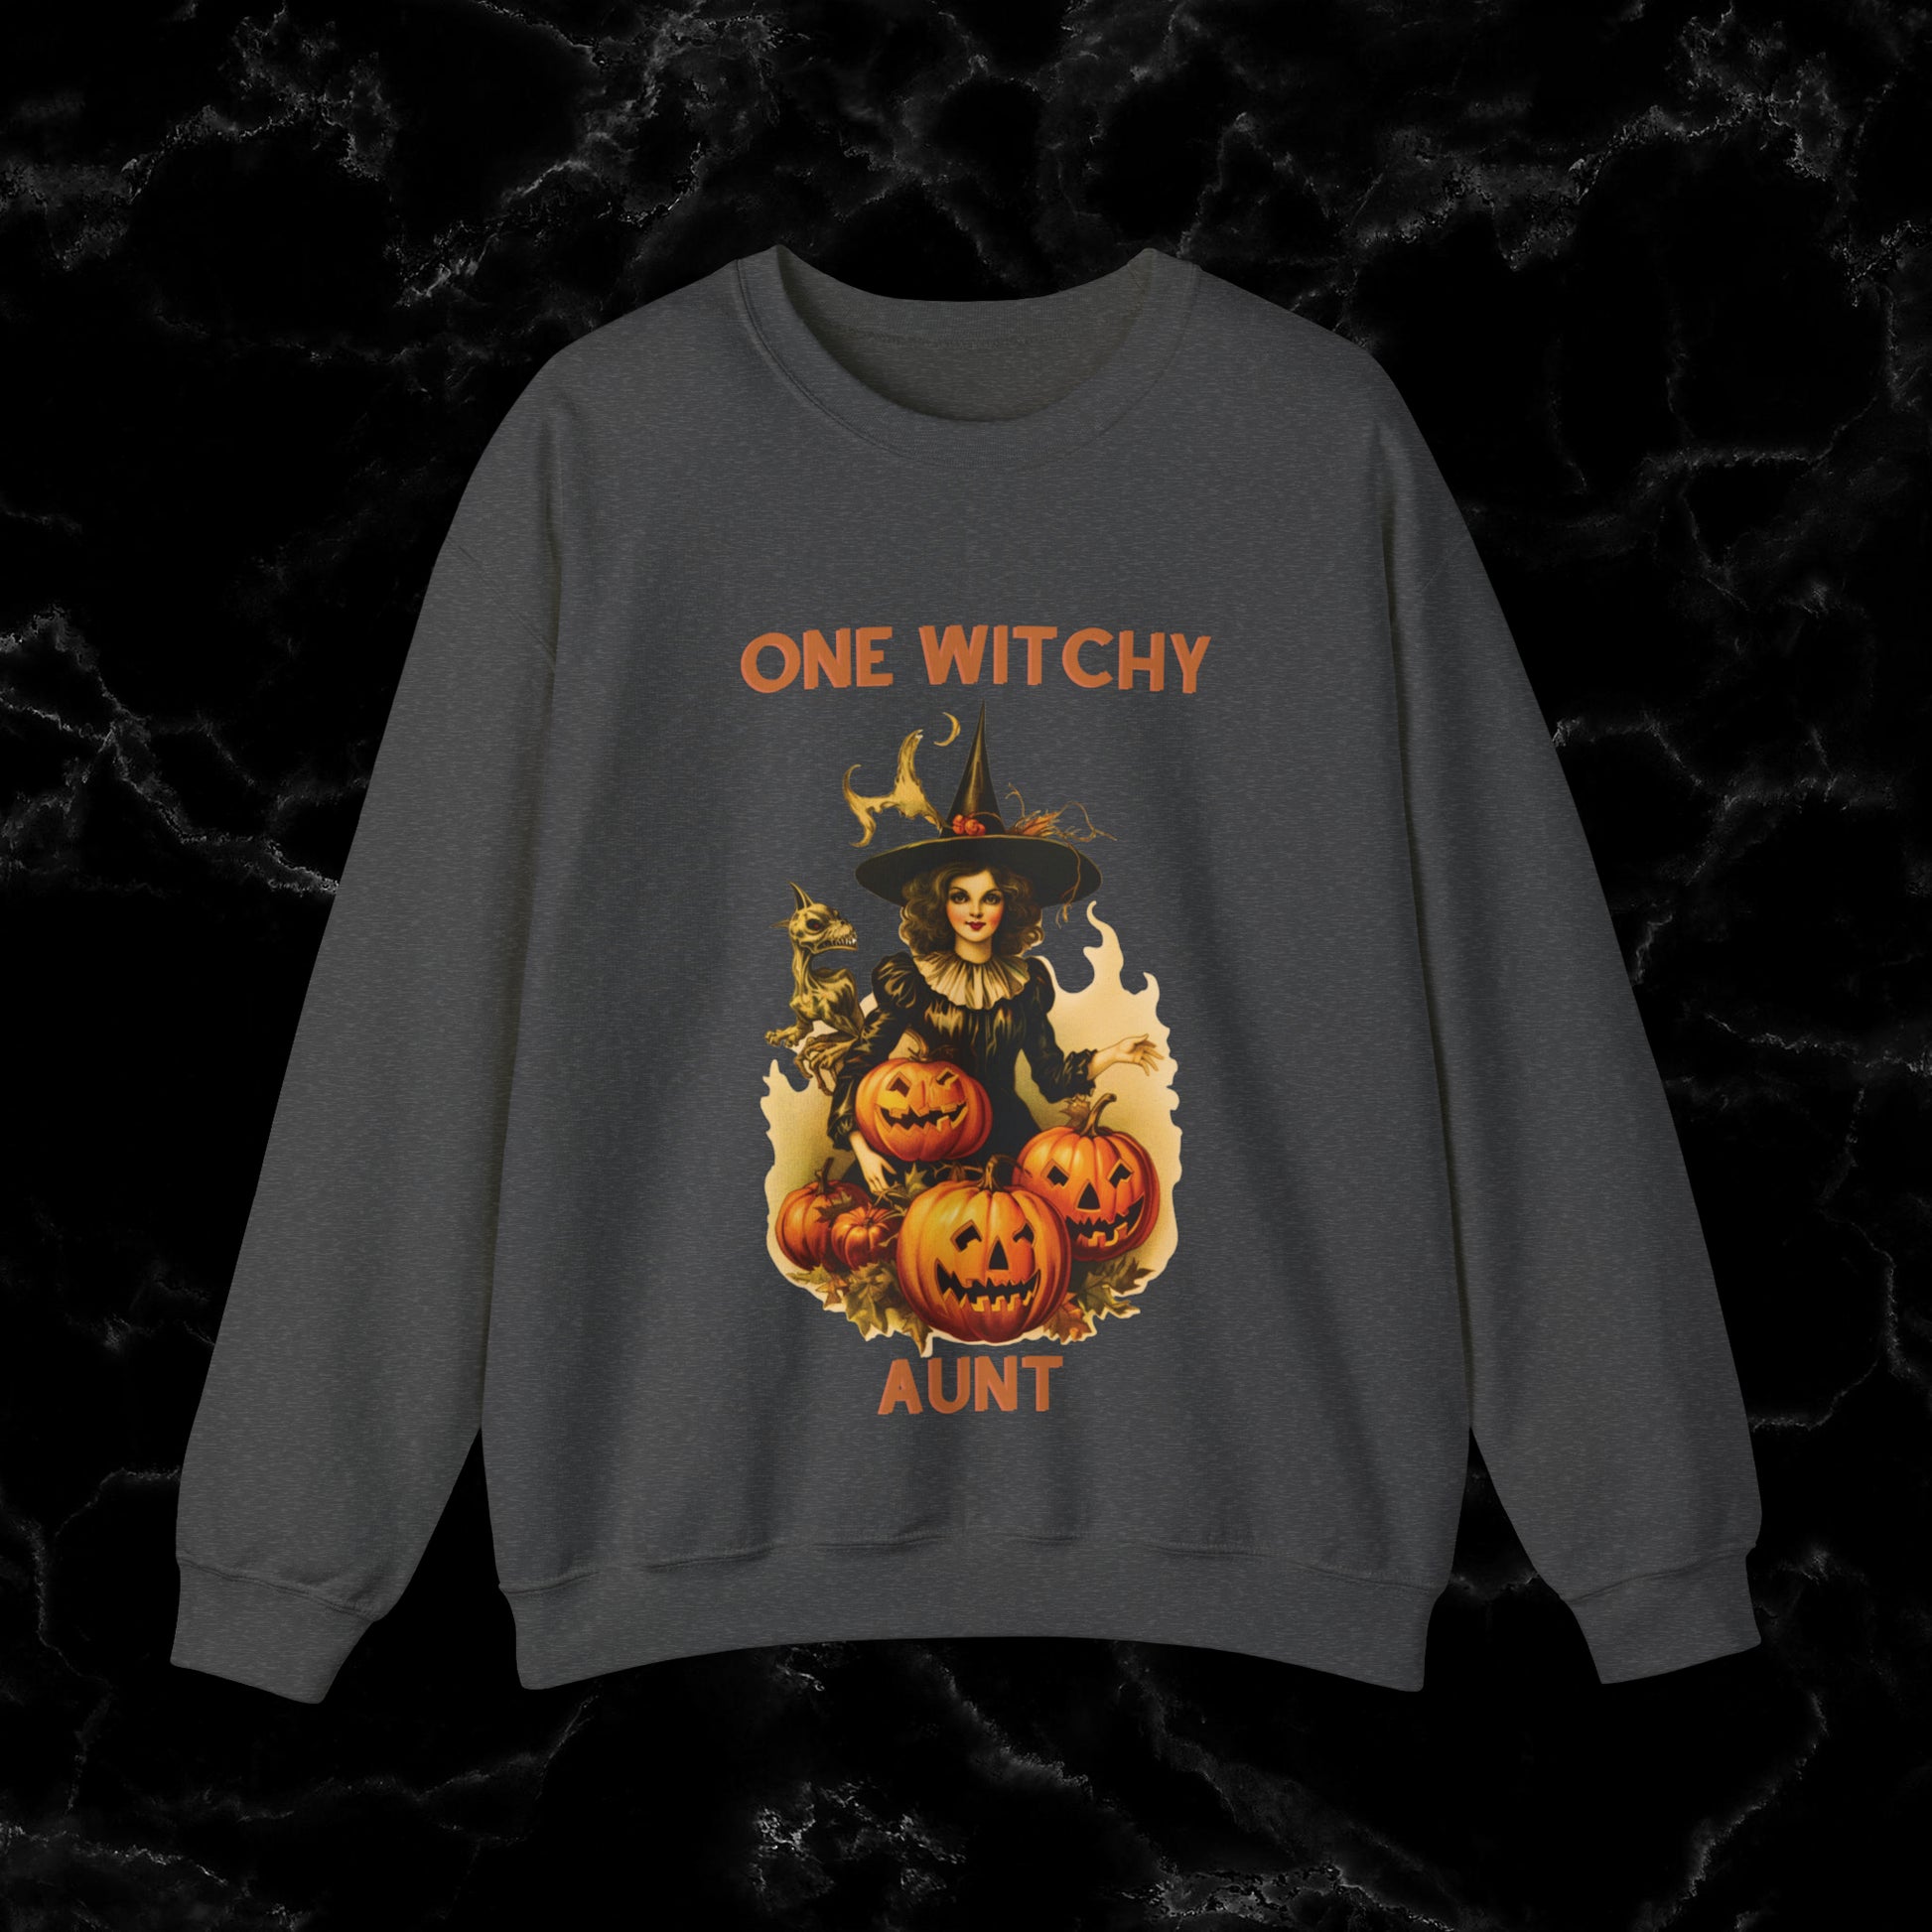 One Witchy Aunt Sweatshirt - Cool Aunt Shirt, Feral Aunt Sweatshirt, Perfect Gifts for Aunts, Auntie Sweatshirt Sweatshirt S Dark Heather 